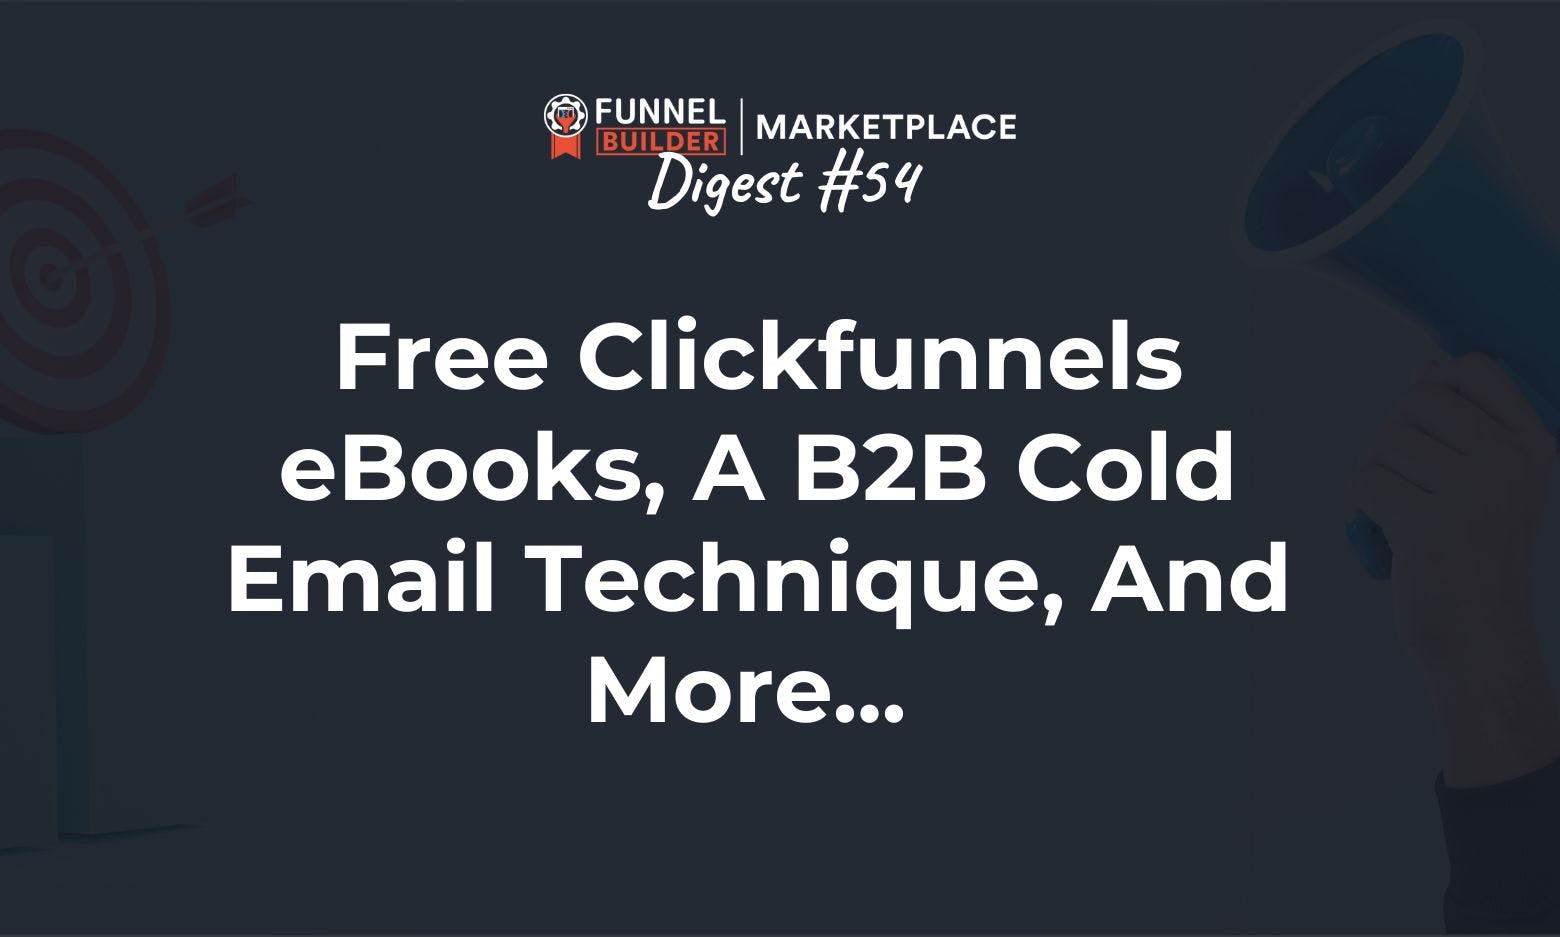 FBM Digest #54: Free Clickfunnels ebooks, B2B cold email technique, and more... 